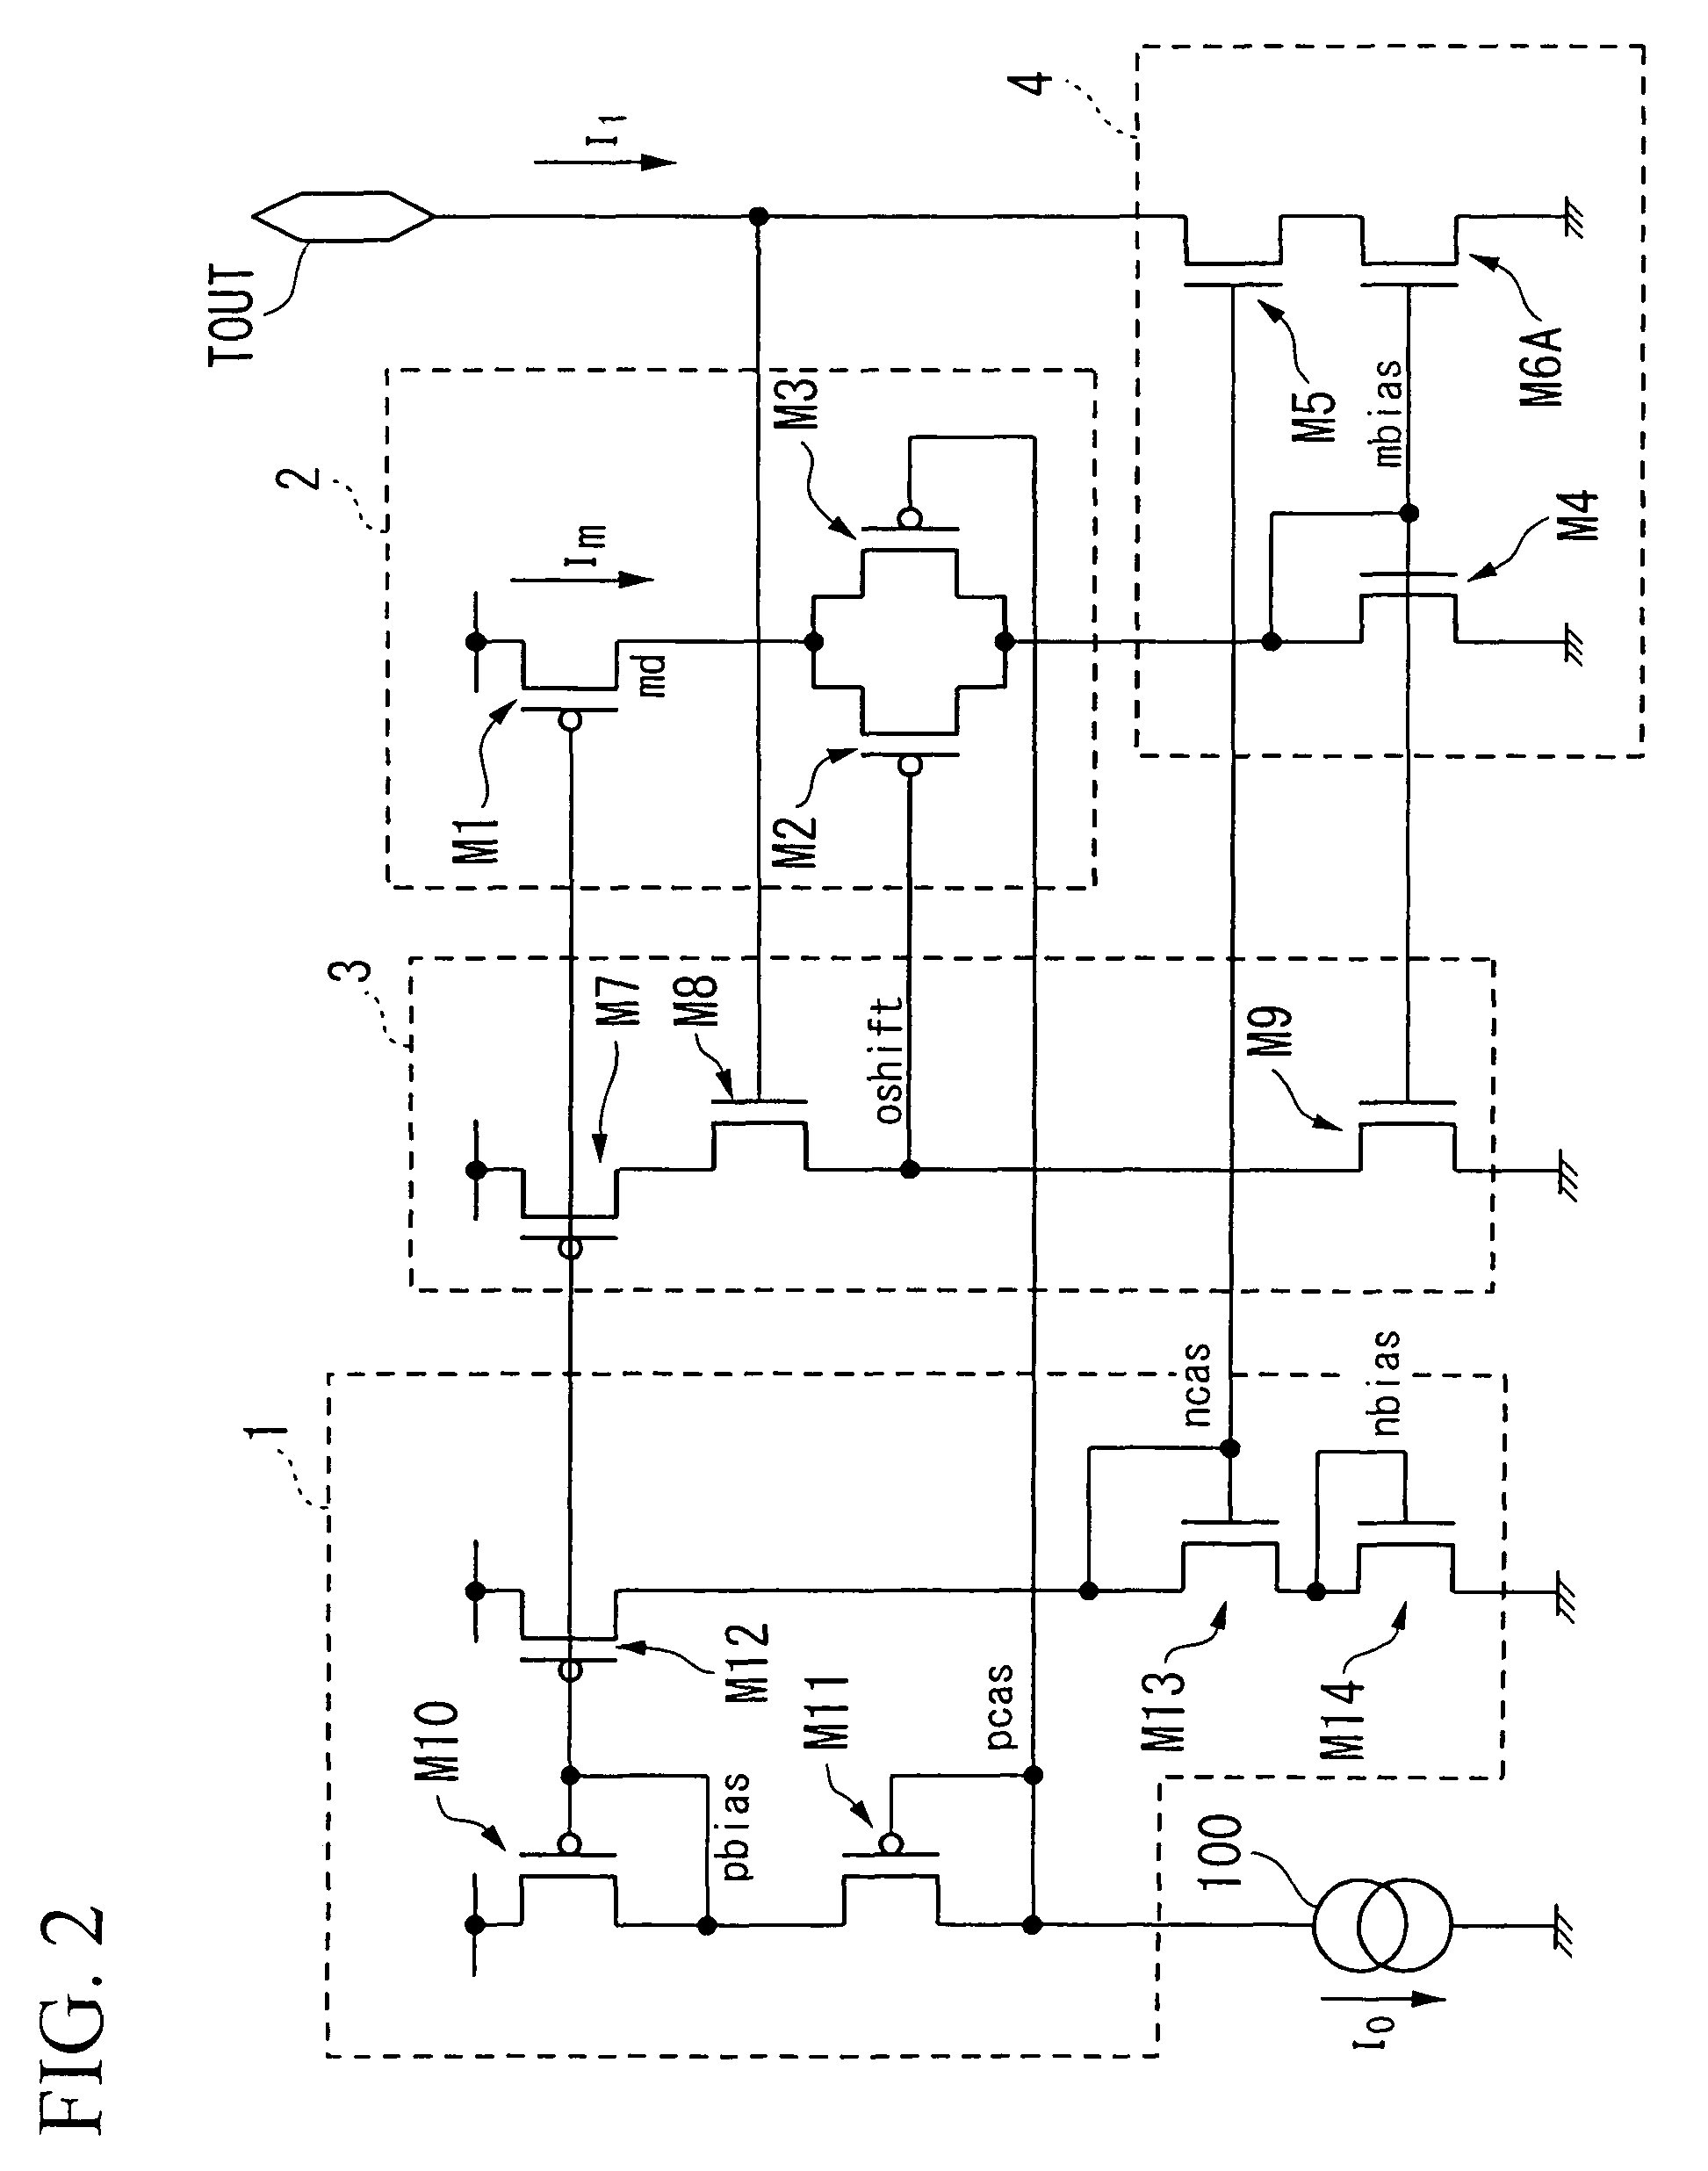 Circuit including first and second transistors coupled between an outpout terminal and a power supply